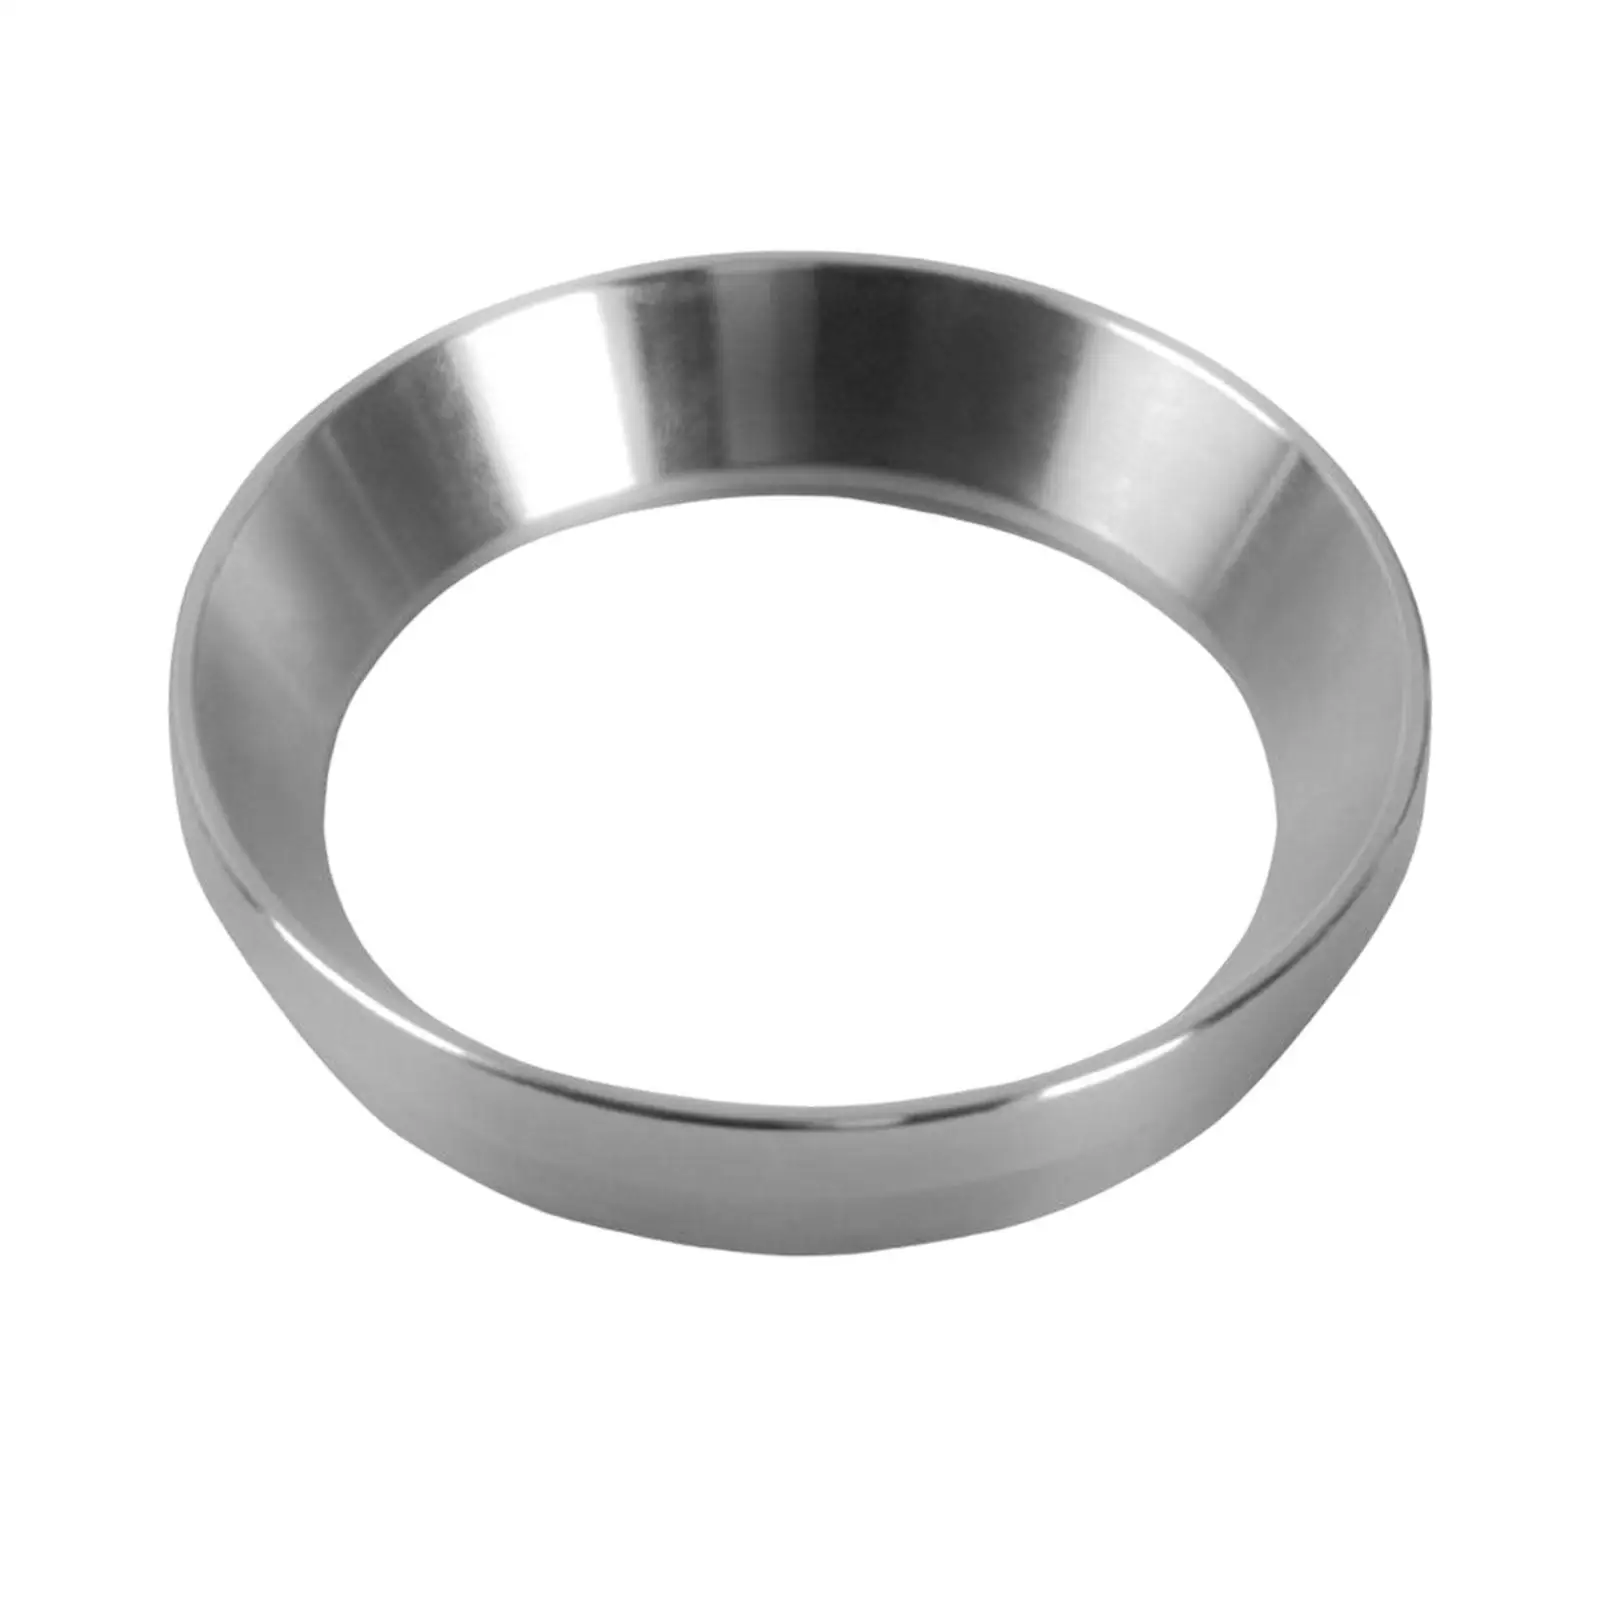 Coffee Dosing Ring 304 Stainless Steel Simple Design Avoid Powder from Spreading Durable Home Office Use Exquisite Lightweight